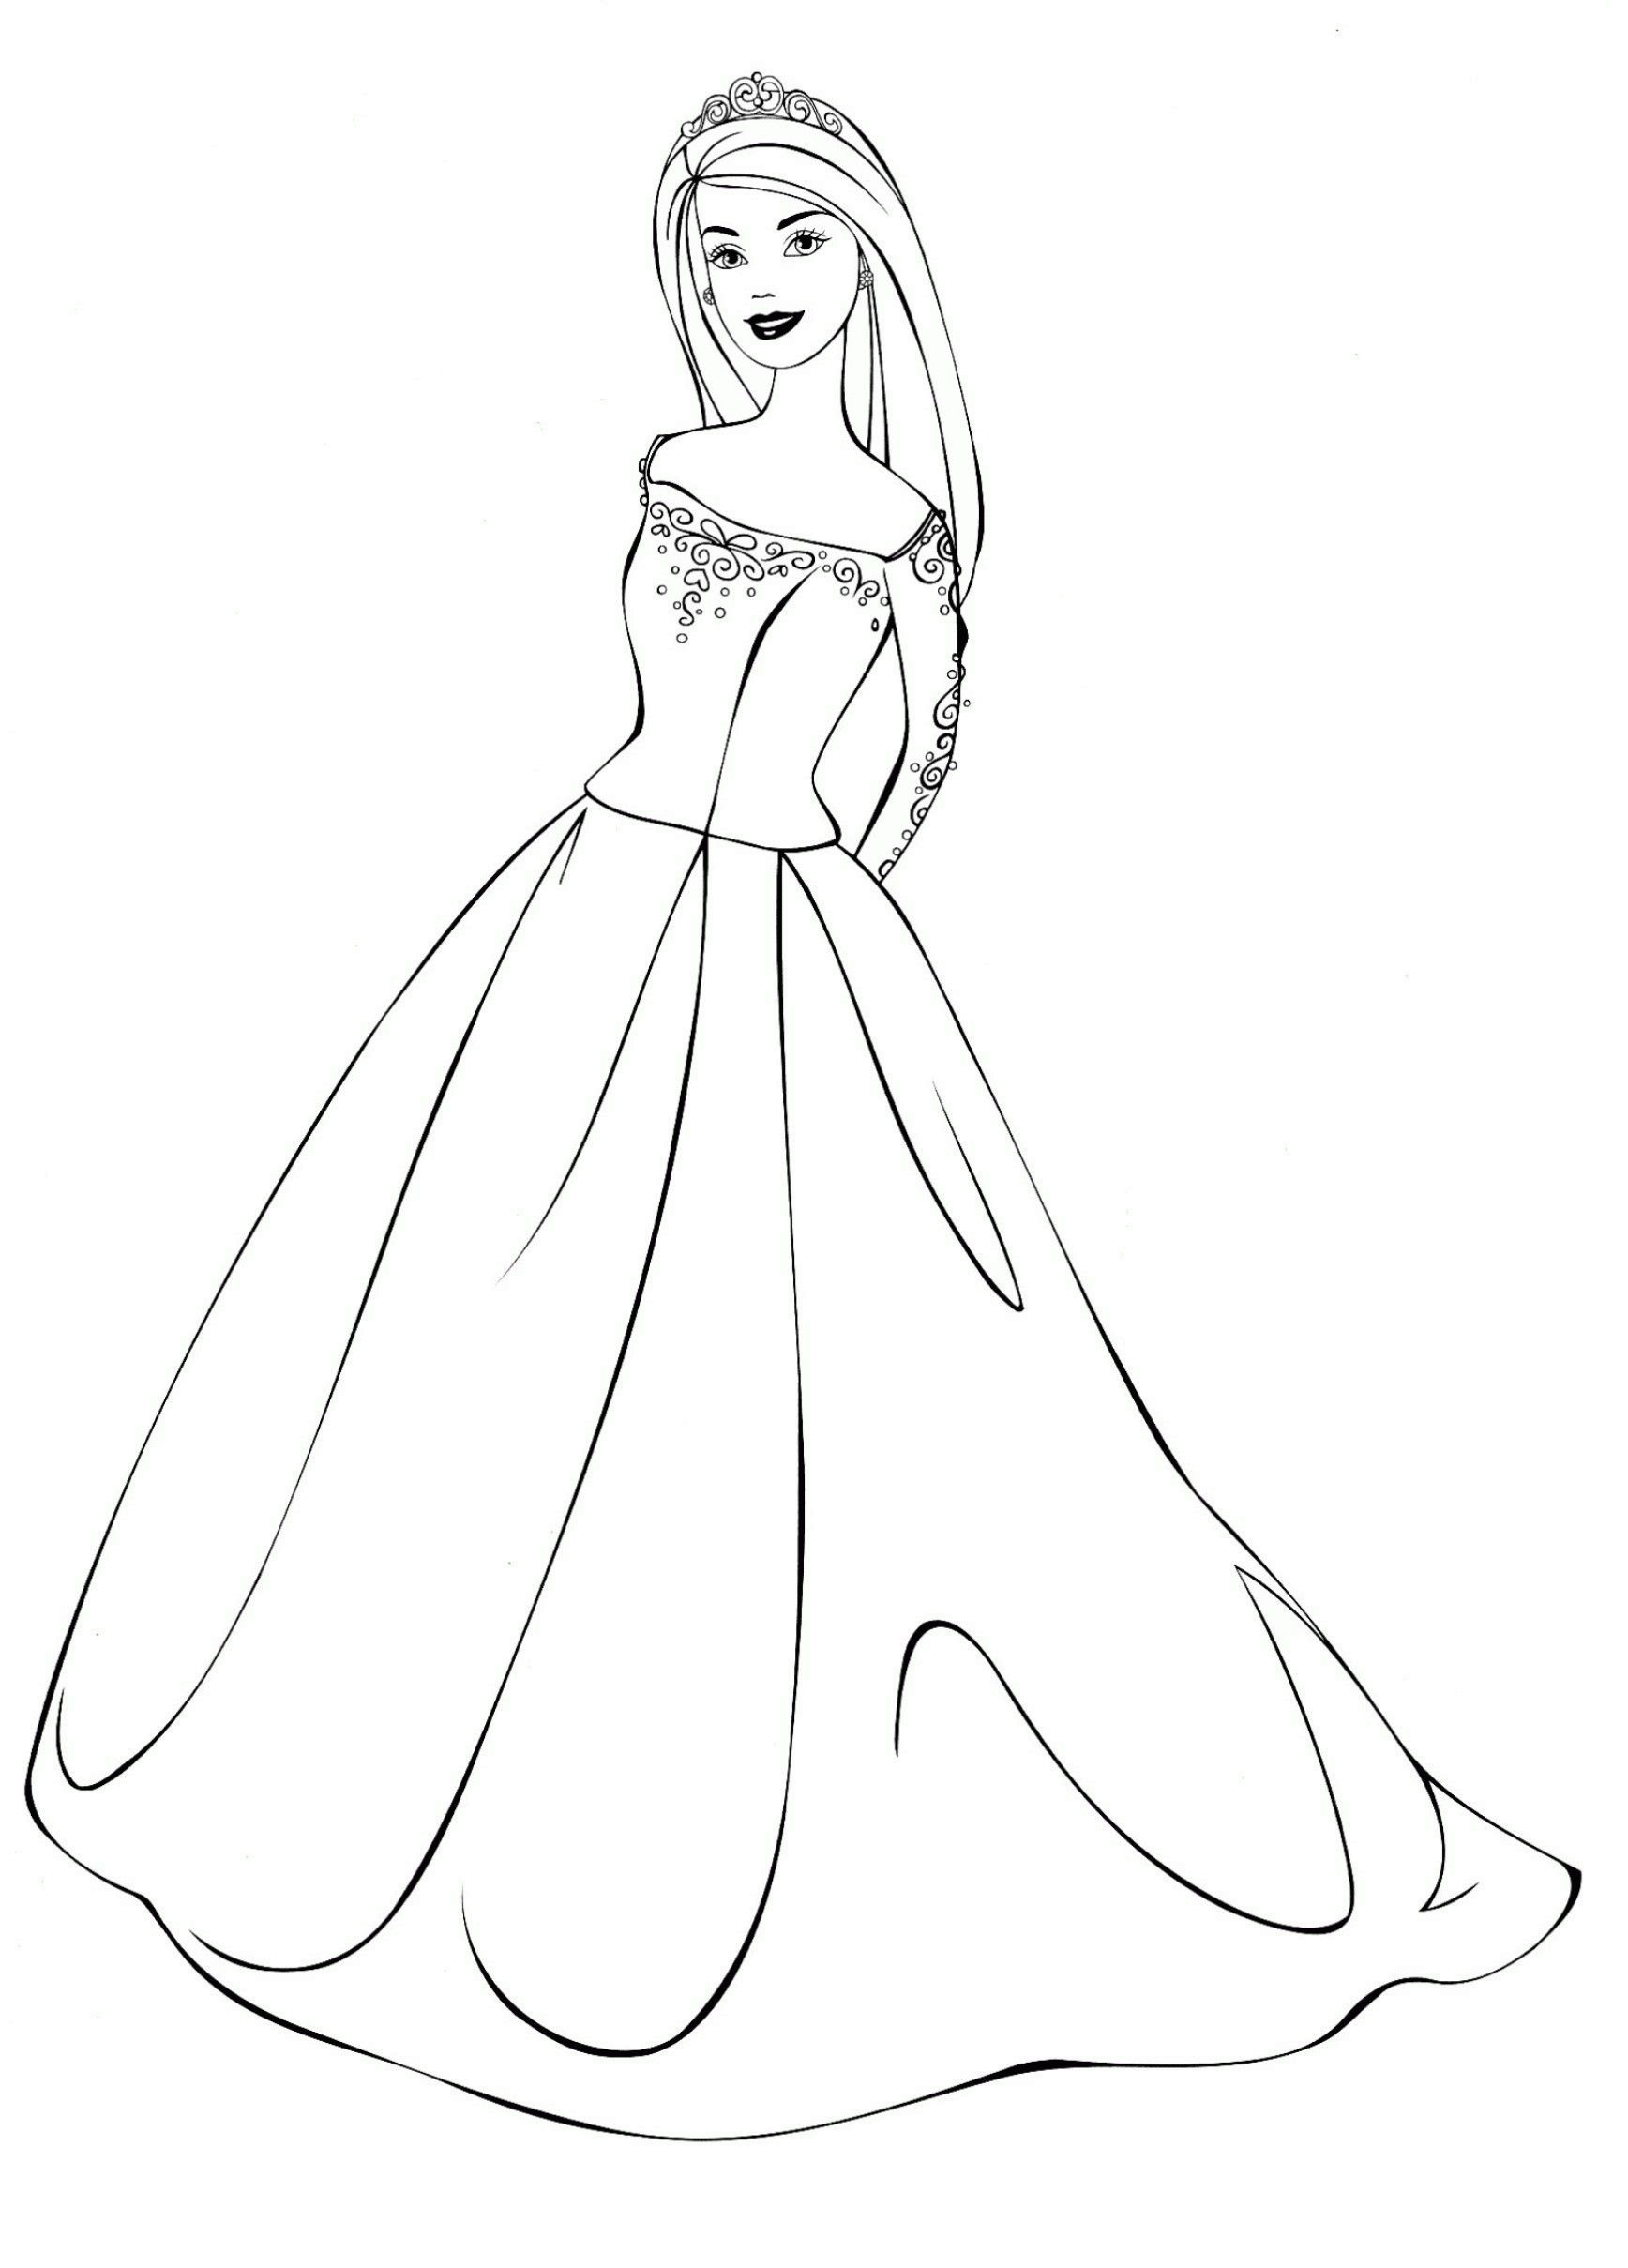  48 Dress Coloring Pages To Print  Free